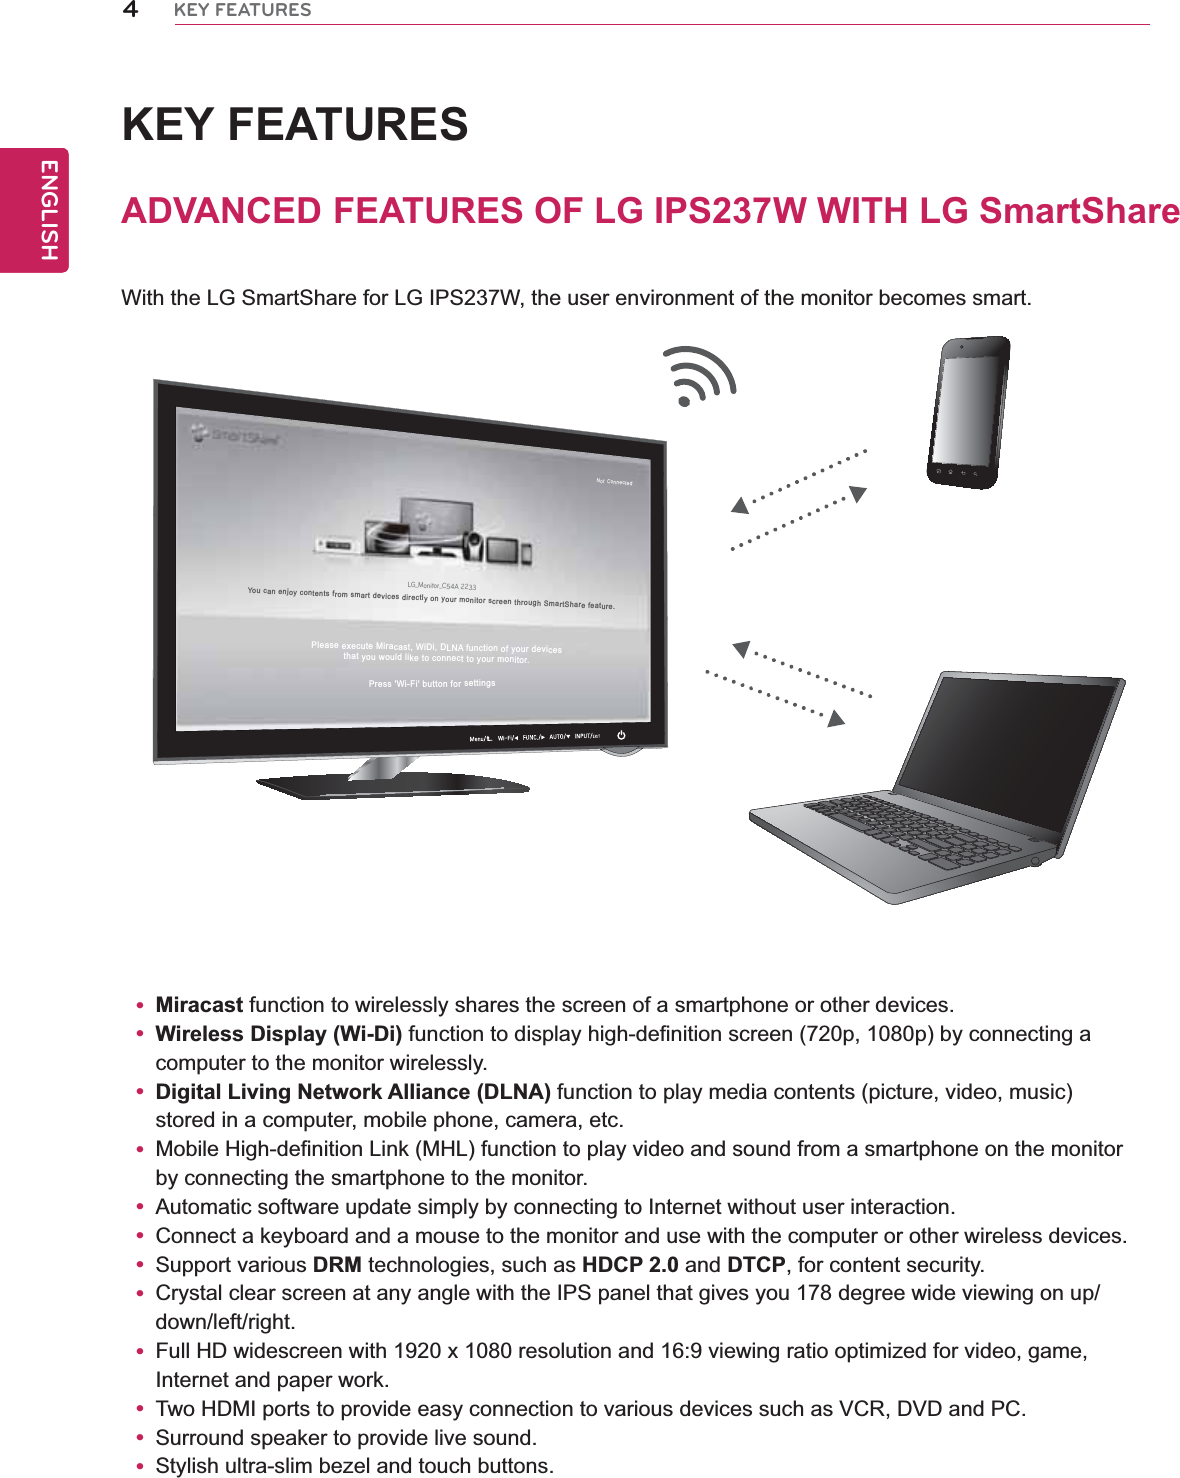 4ENGENGLISHKEY FEATURESKEY FEATURESADVANCED FEATURES OF LG IPS237W WITH LG SmartShareWith the LG SmartShare for LG IPS237W, the user environment of the monitor becomes smart.y Miracast function to wirelessly shares the screen of a smartphone or other devices.y Wireless Display (Wi-Di) function to display high-definition screen (720p, 1080p) by connecting a computer to the monitor wirelessly.y Digital Living Network Alliance (DLNA) function to play media contents (picture, video, music) stored in a computer, mobile phone, camera, etc.y Mobile High-definition Link (MHL) function to play video and sound from a smartphone on the monitor by connecting the smartphone to the monitor.y Automatic software update simply by connecting to Internet without user interaction.y Connect a keyboard and a mouse to the monitor and use with the computer or other wireless devices.y Support various DRM technologies, such as HDCP 2.0 and DTCP, for content security.y Crystal clear screen at any angle with the IPS panel that gives you 178 degree wide viewing on up/down/left/right.y Full HD widescreen with 1920 x 1080 resolution and 16:9 viewing ratio optimized for video, game, Internet and paper work.y Two HDMI ports to provide easy connection to various devices such as VCR, DVD and PC.y Surround speaker to provide live sound.y Stylish ultra-slim bezel and touch buttons.LG_Monitor_C54A 2233/PU$POOFDUFEYou can enjoy contents from smart devices directly on your monitor screen through SmartShare feature.Please execute Miracast, WiDi, DLNA function of your devicesthat you would like to connect to your monitor.Press &apos;Wi-Fi&apos; button for settings